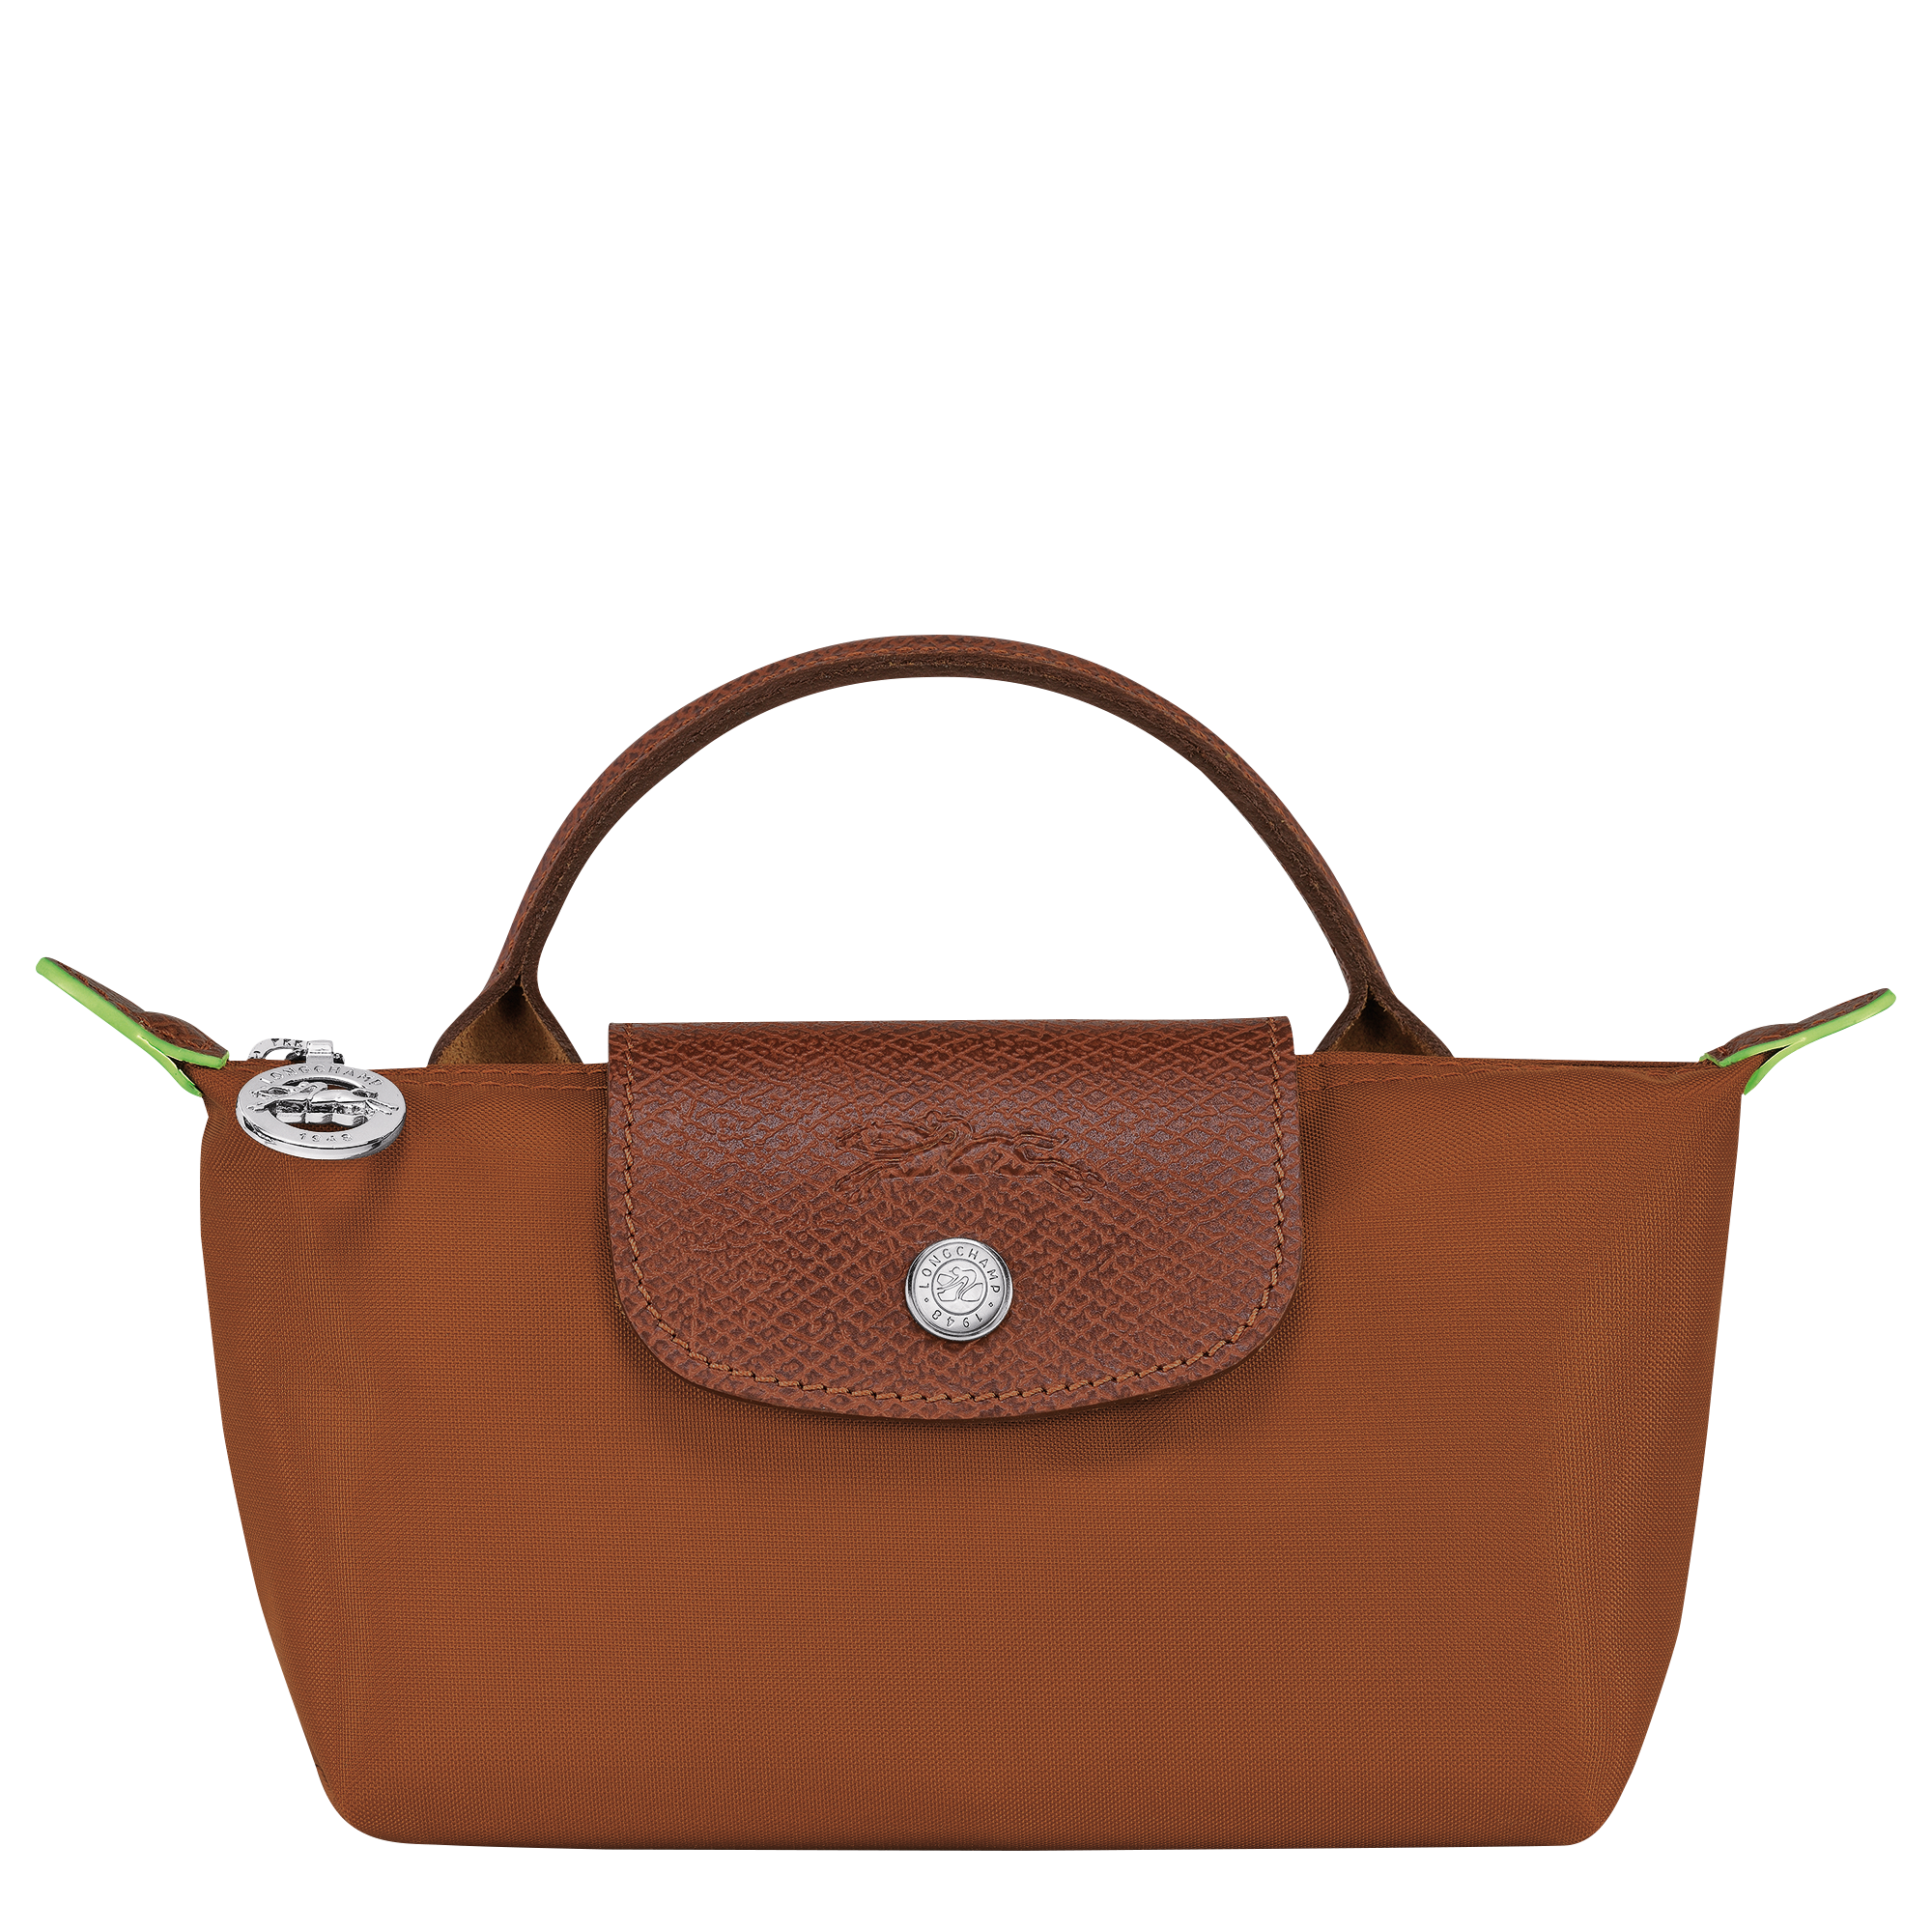 Longchamp's Le Pliage Pouch With Handle Has New Colours To Love